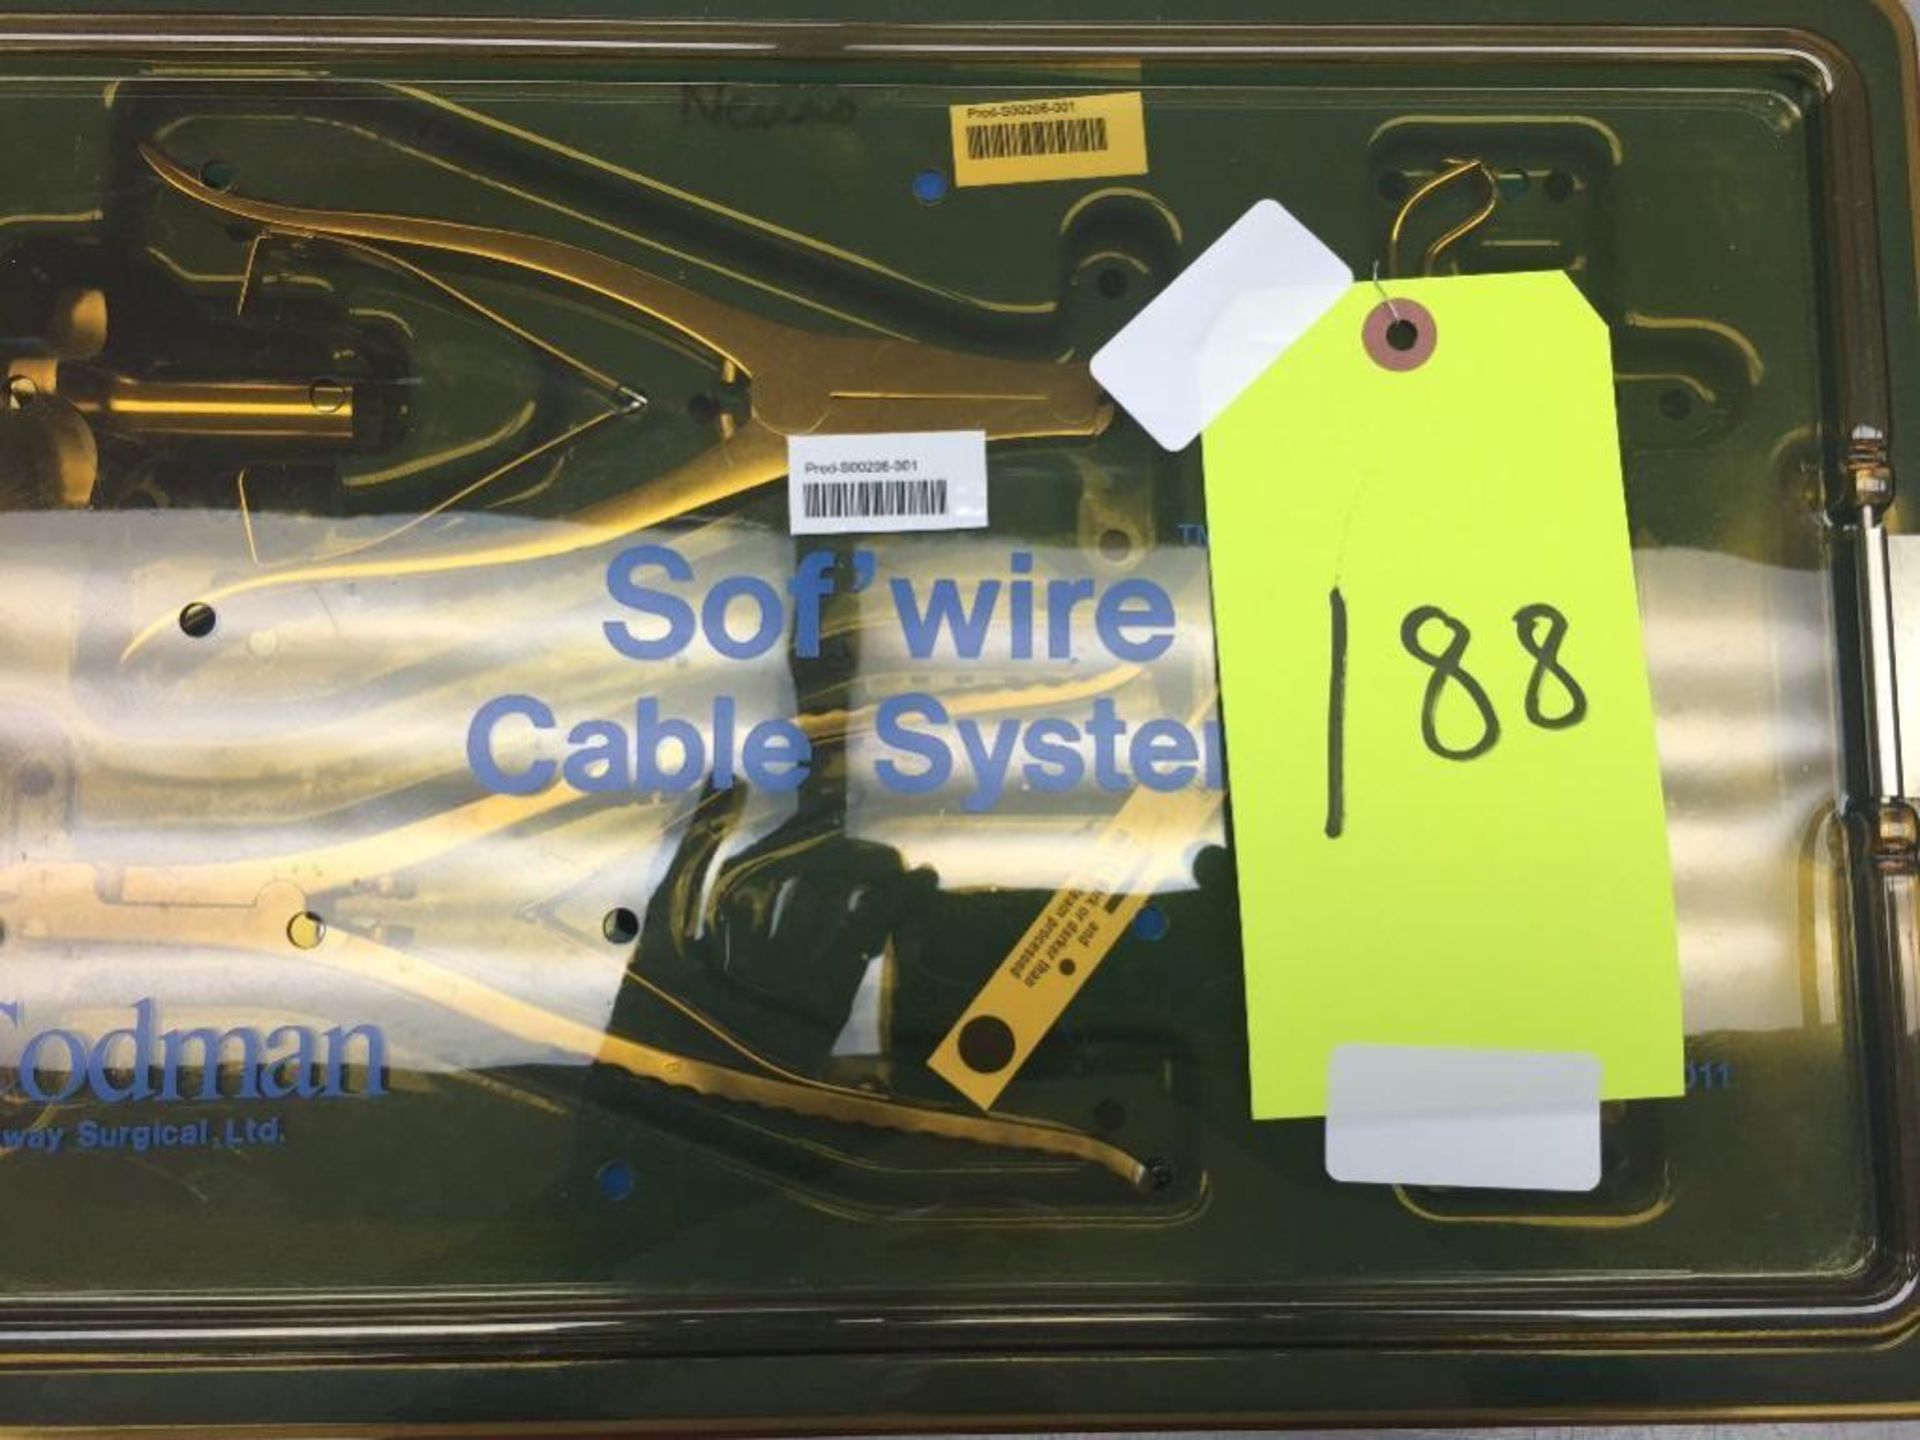 Codman Sof'Wire Cable System - Image 2 of 2